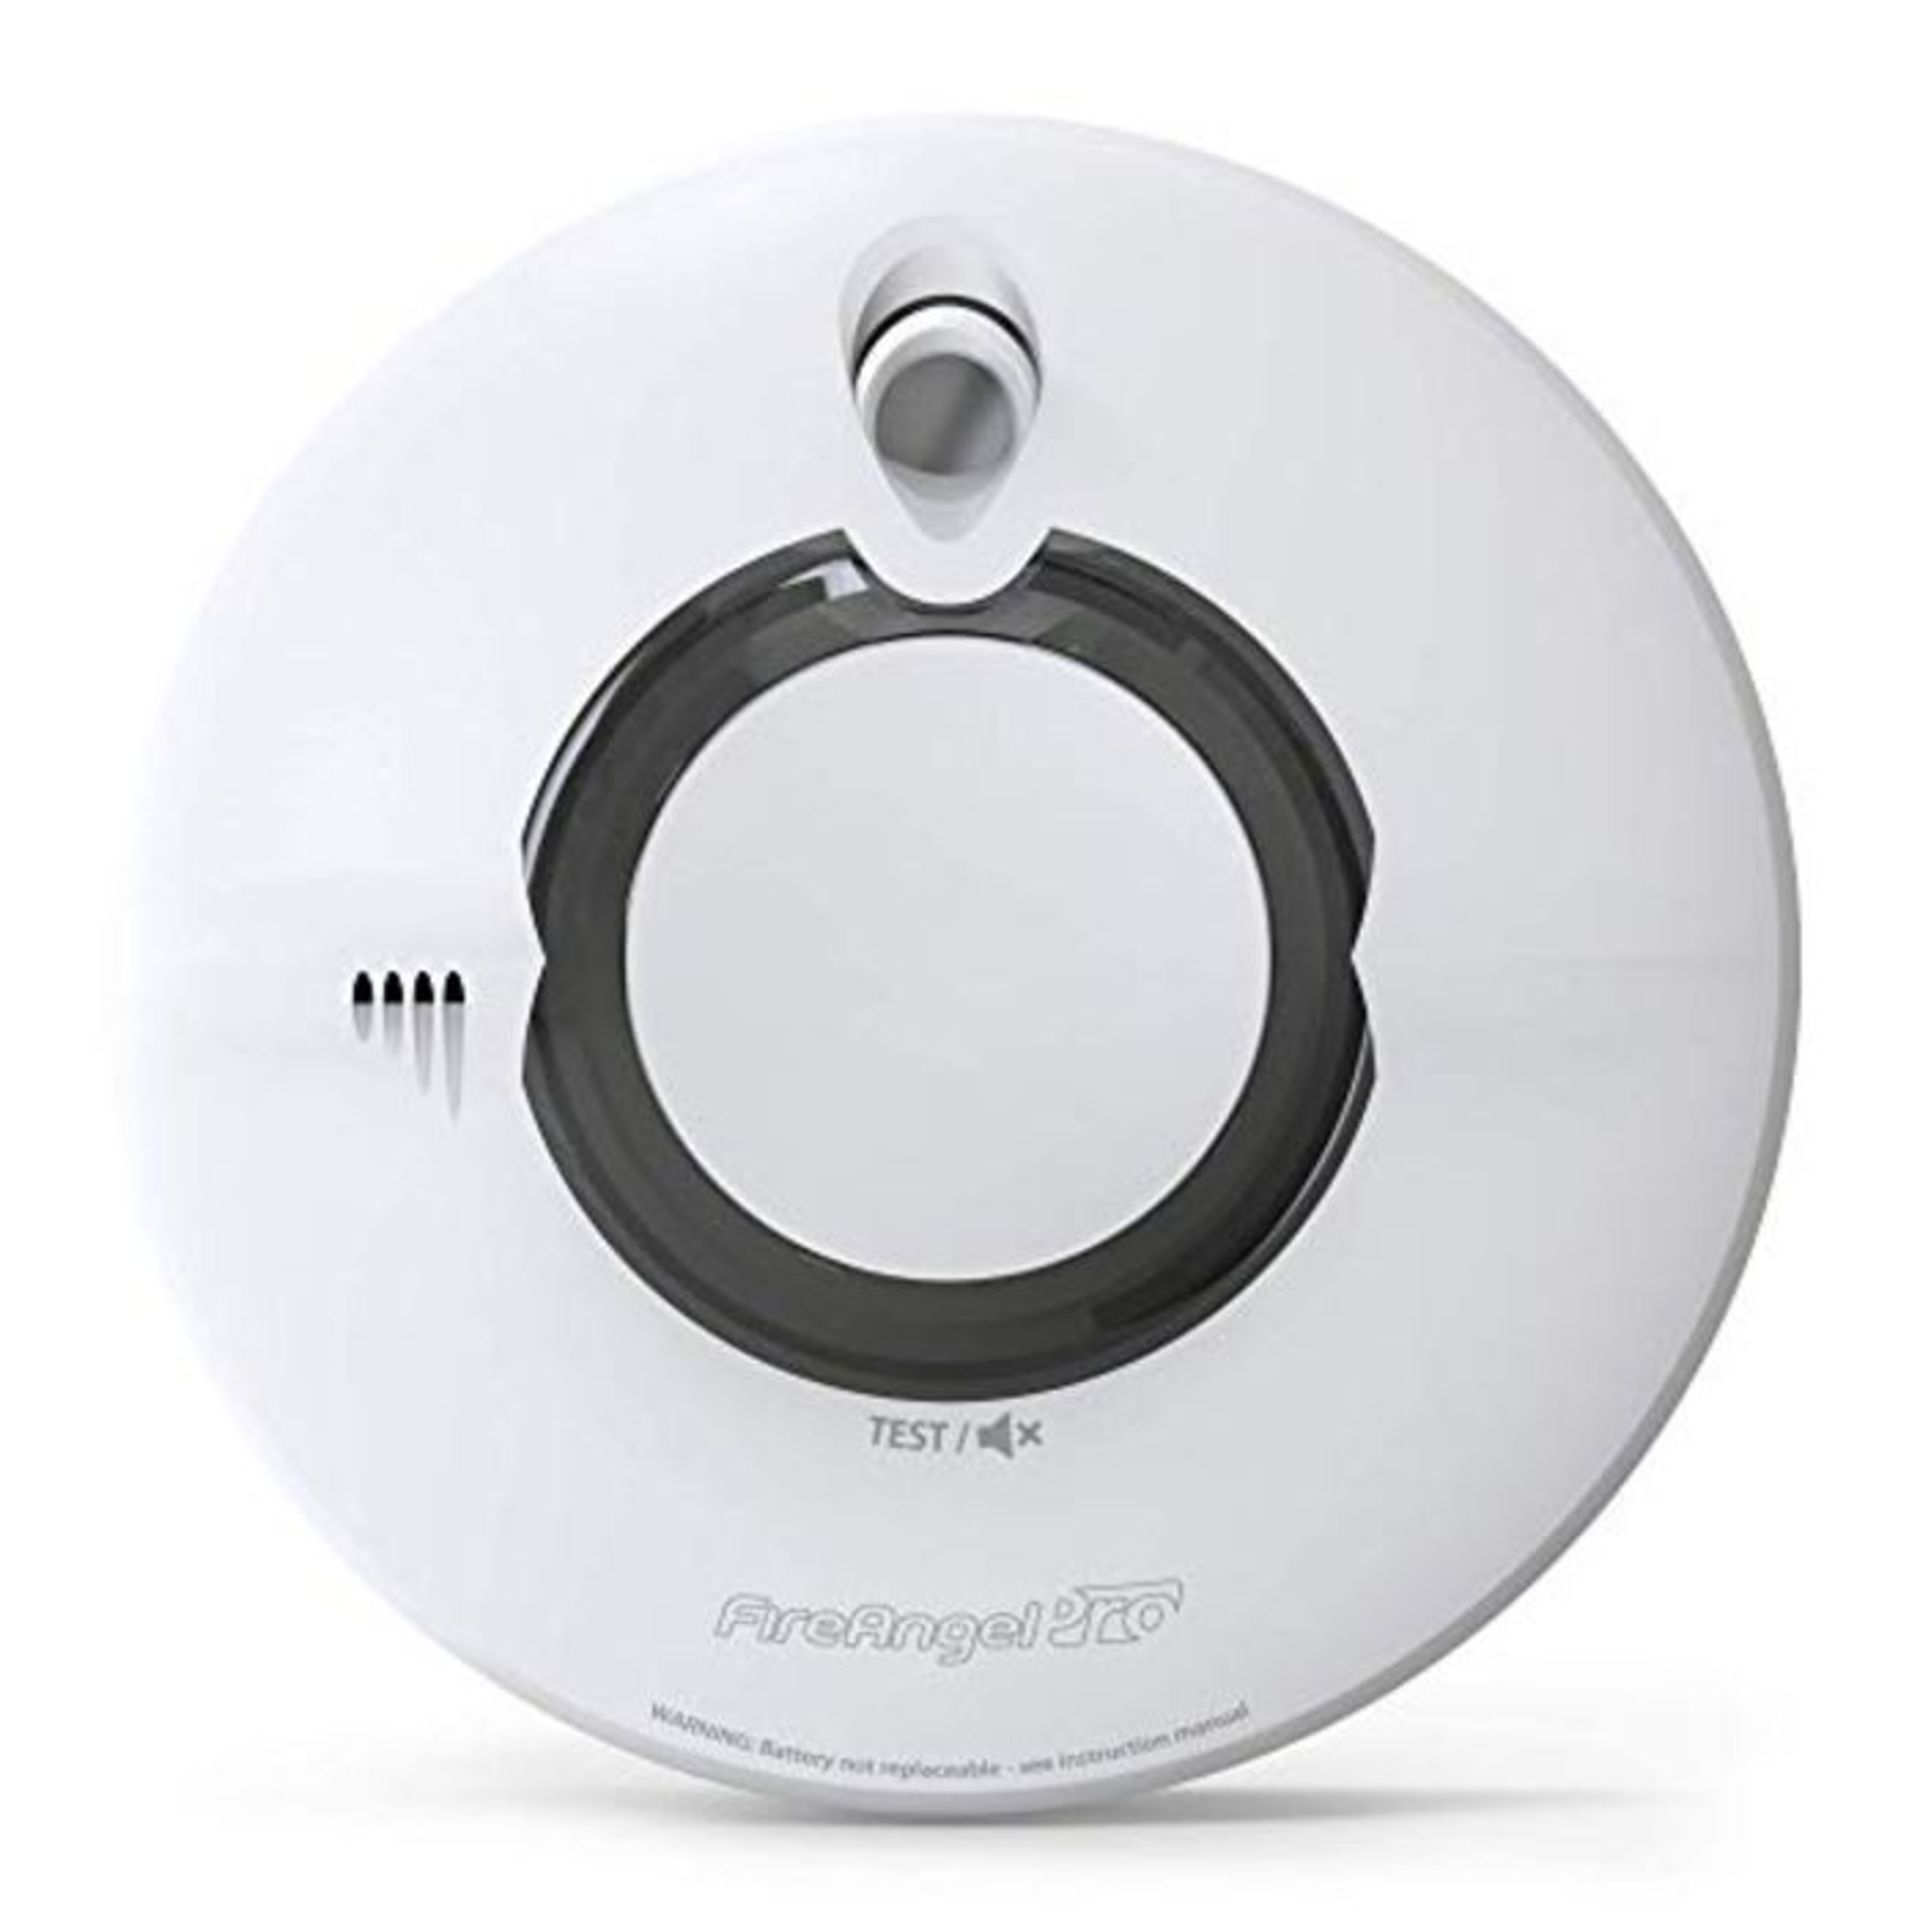 FireAngel Pro Connected Smart Smoke Alarm, Battery Powered with Wireless Interlink and